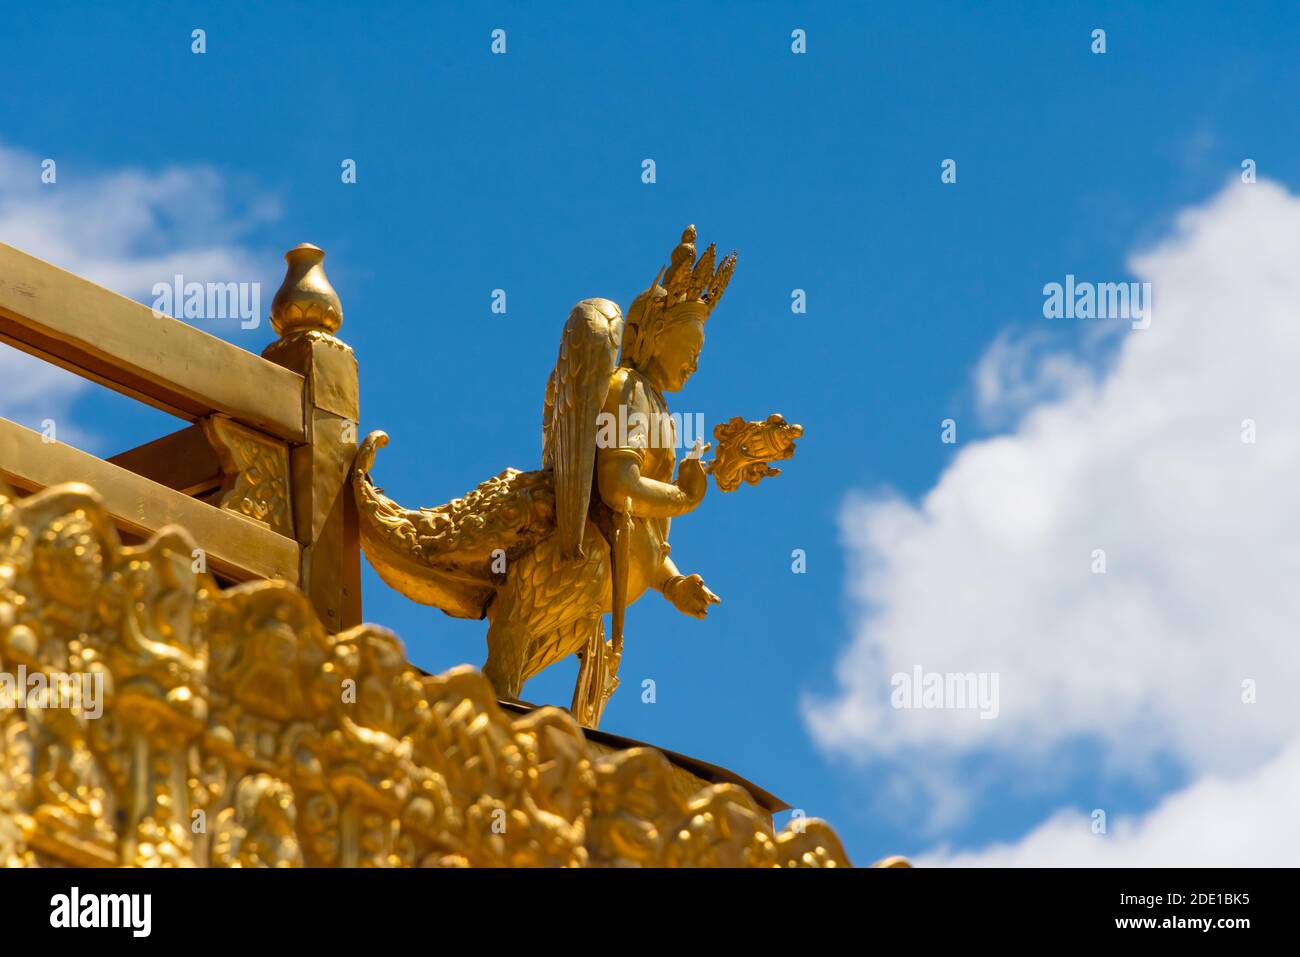 Golden statue on upturned eaves, Jokhang Temple, part of the 'Historic Ensemble of the Potala Palace and a UNESCO World Heritage site, Lhasa, Tibet, C Stock Photo